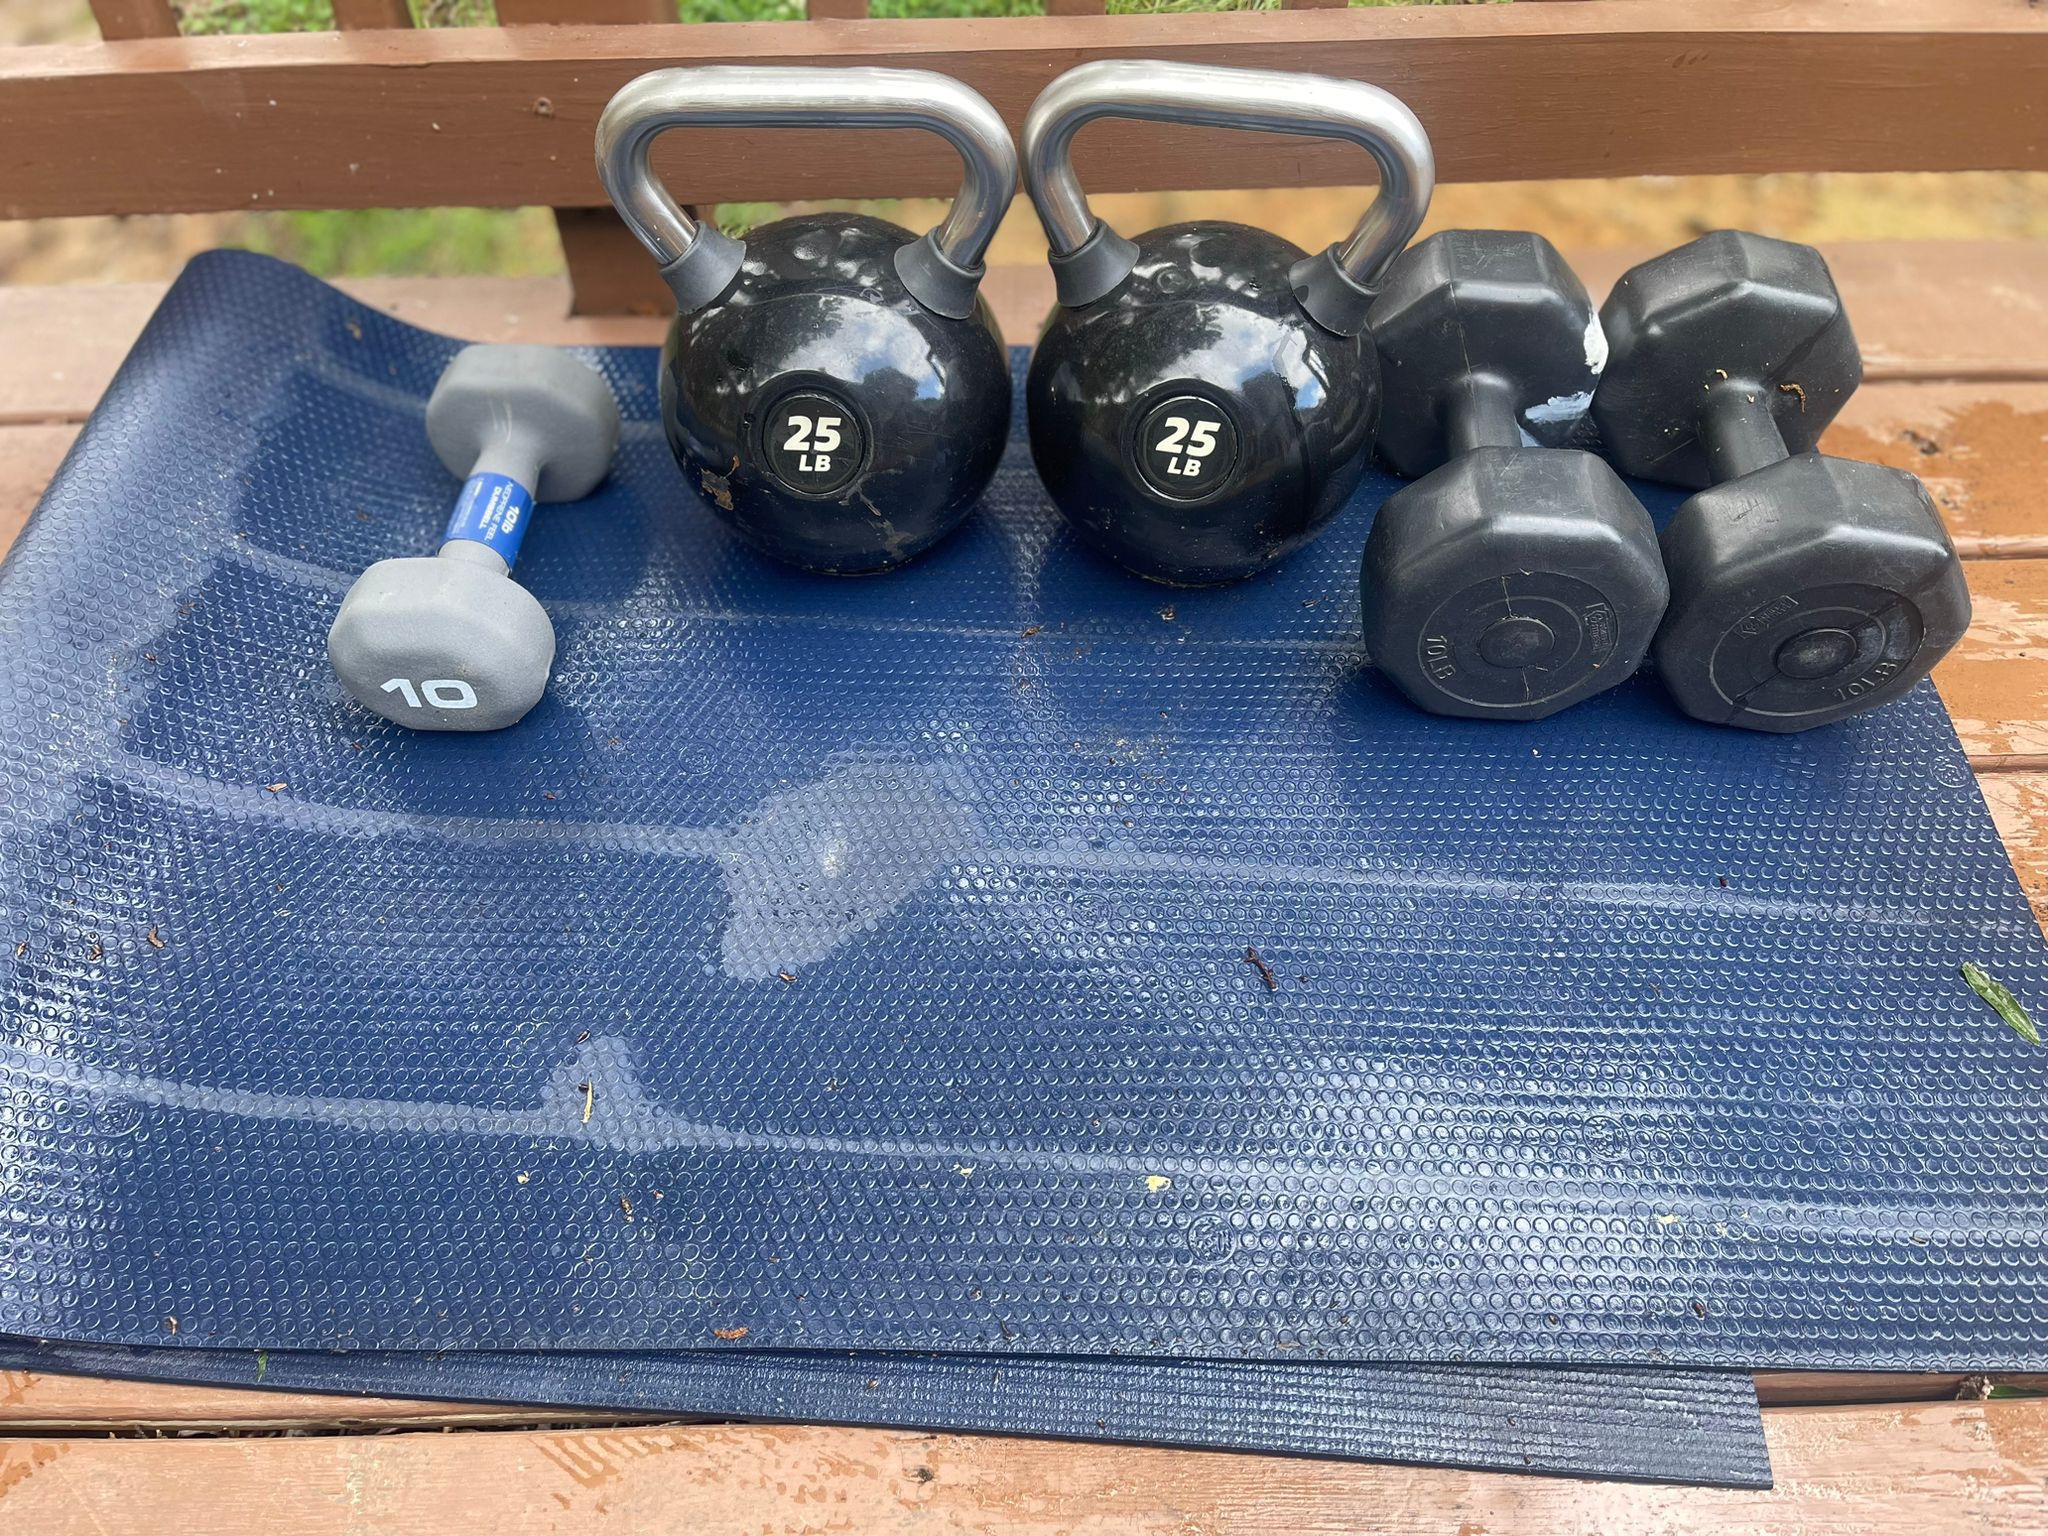 Kettlebell Weights, Yoga Mats And Punch’s Bag 